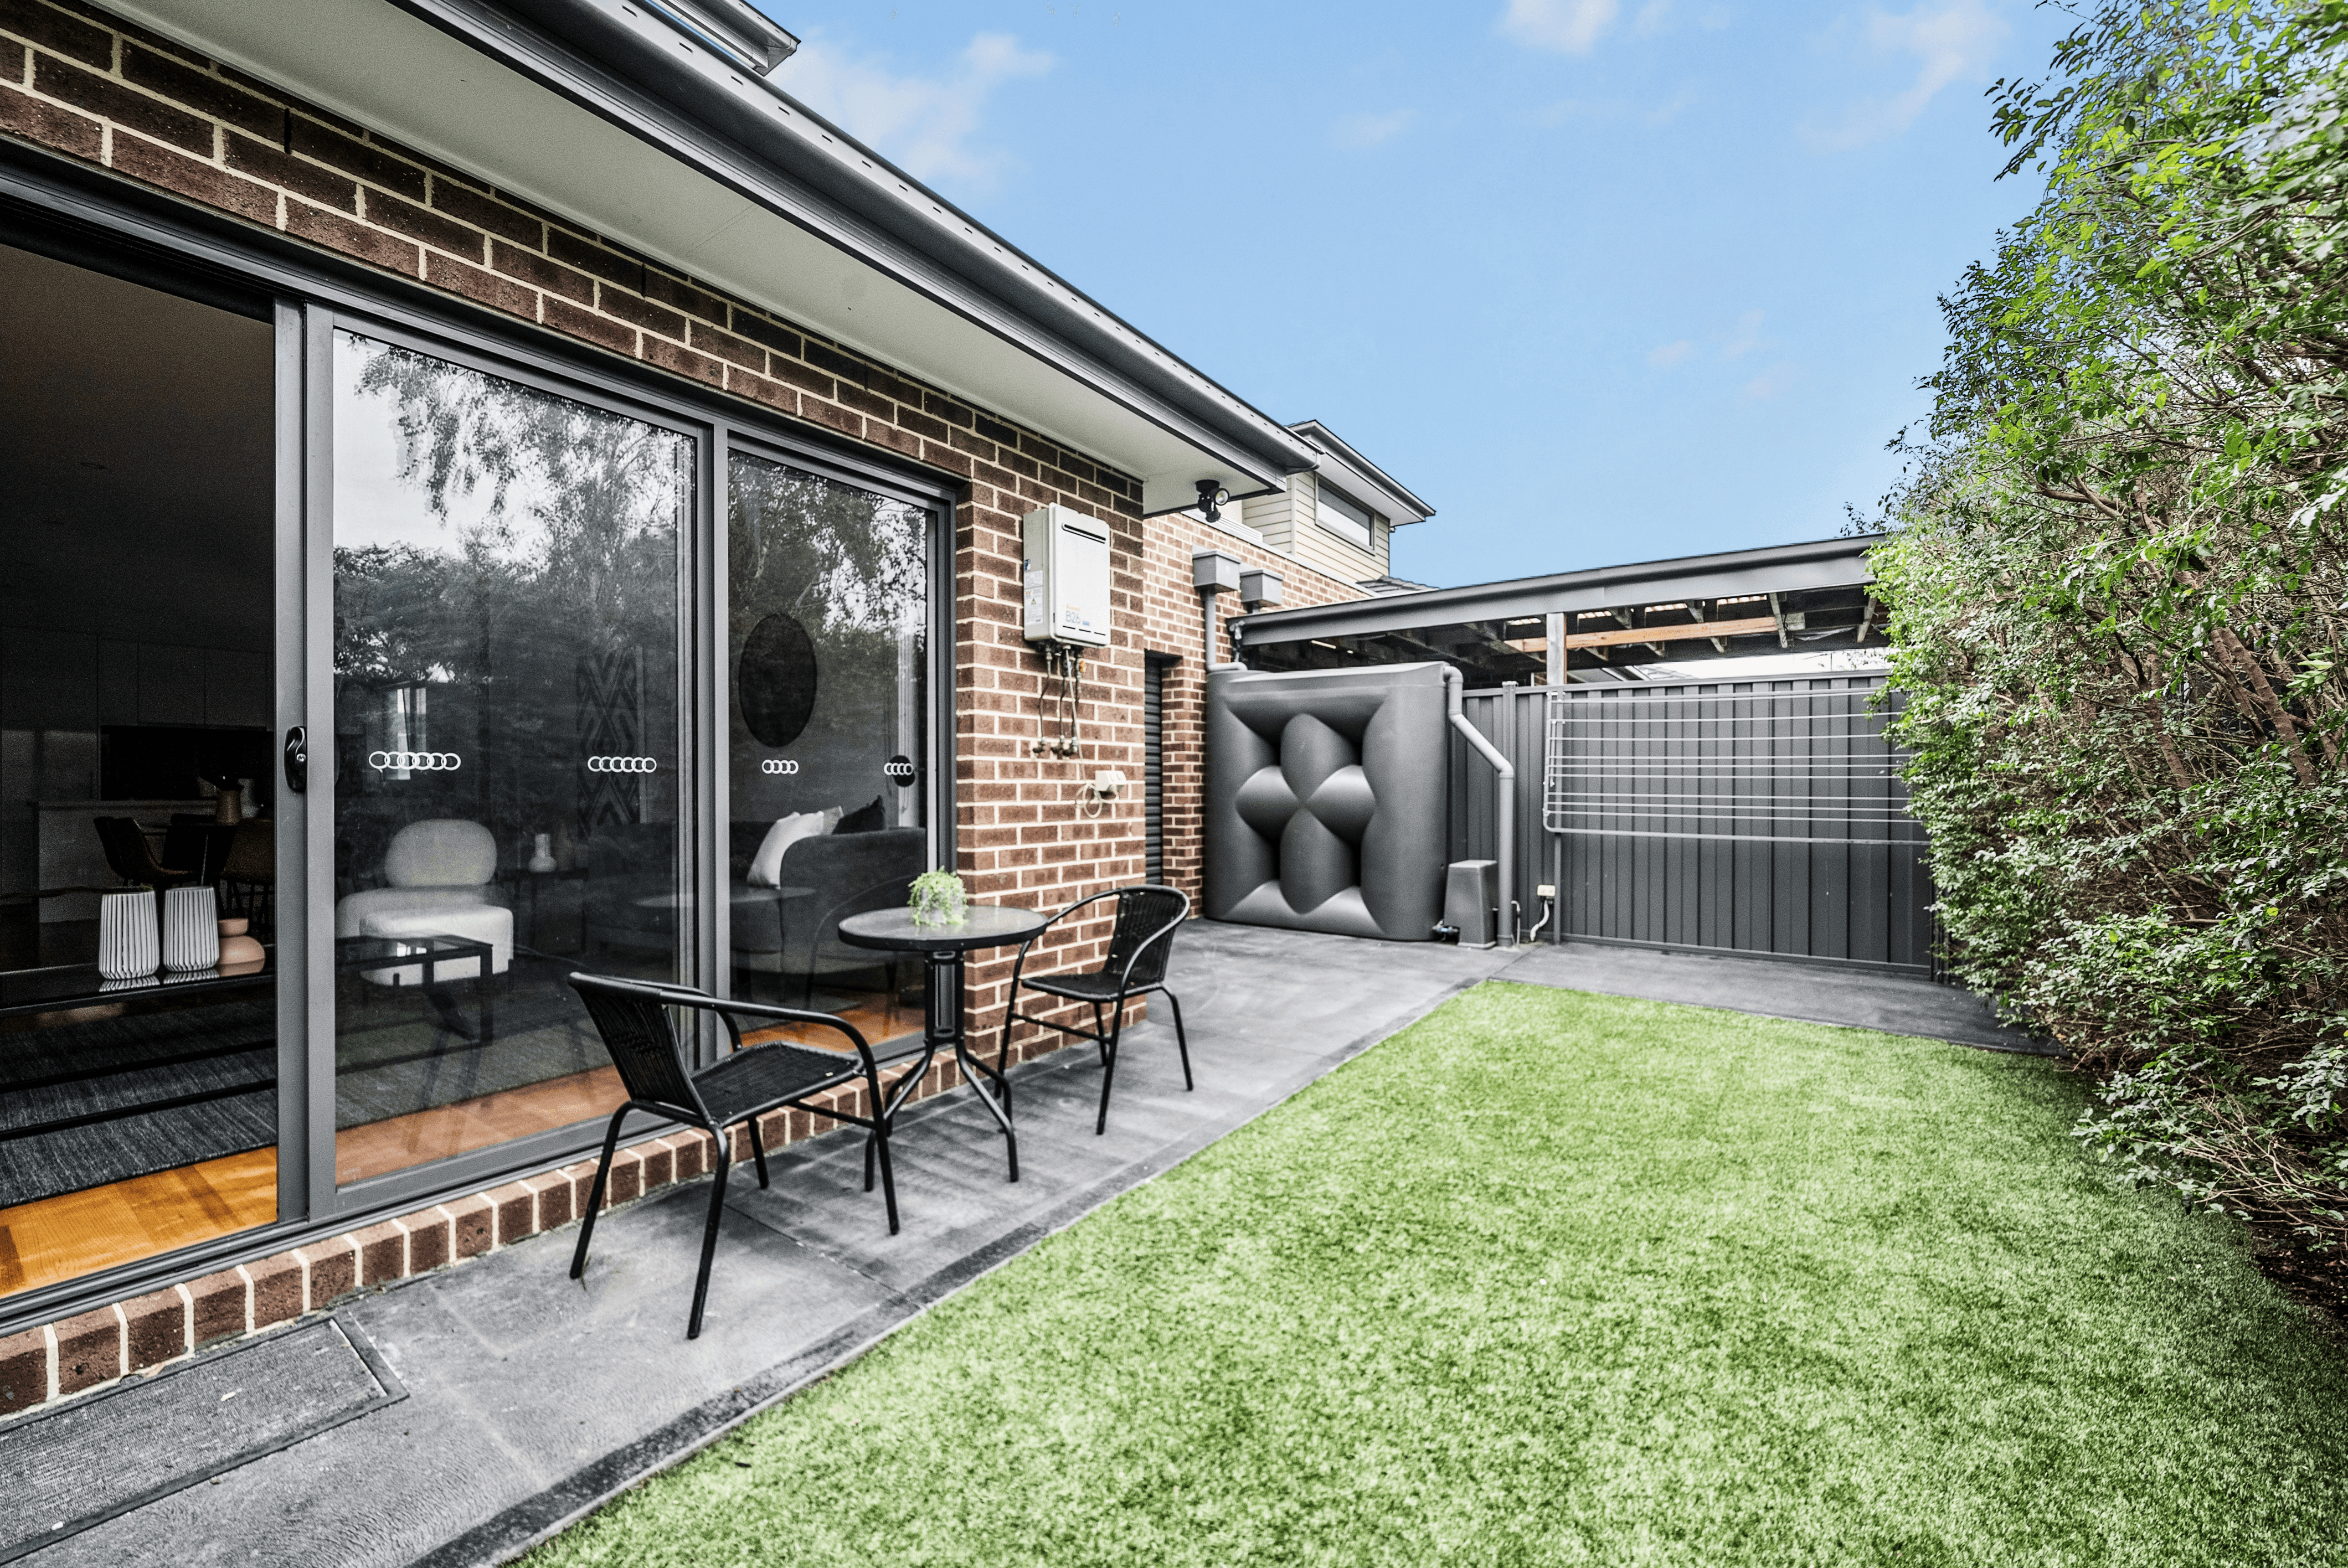 3/15 Olive Grove, PASCOE VALE, VIC 3044